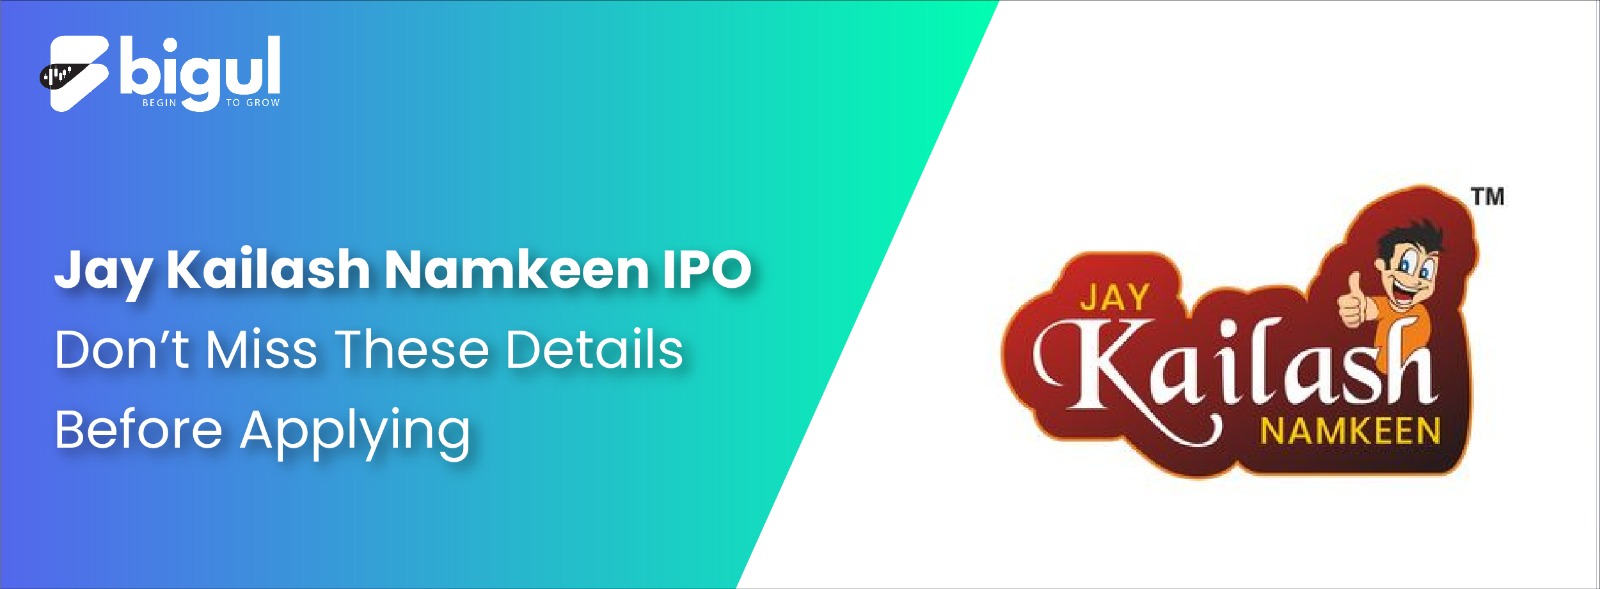 Jay Kailash Namkeen IPO: Don’t Miss These Details Before Applying